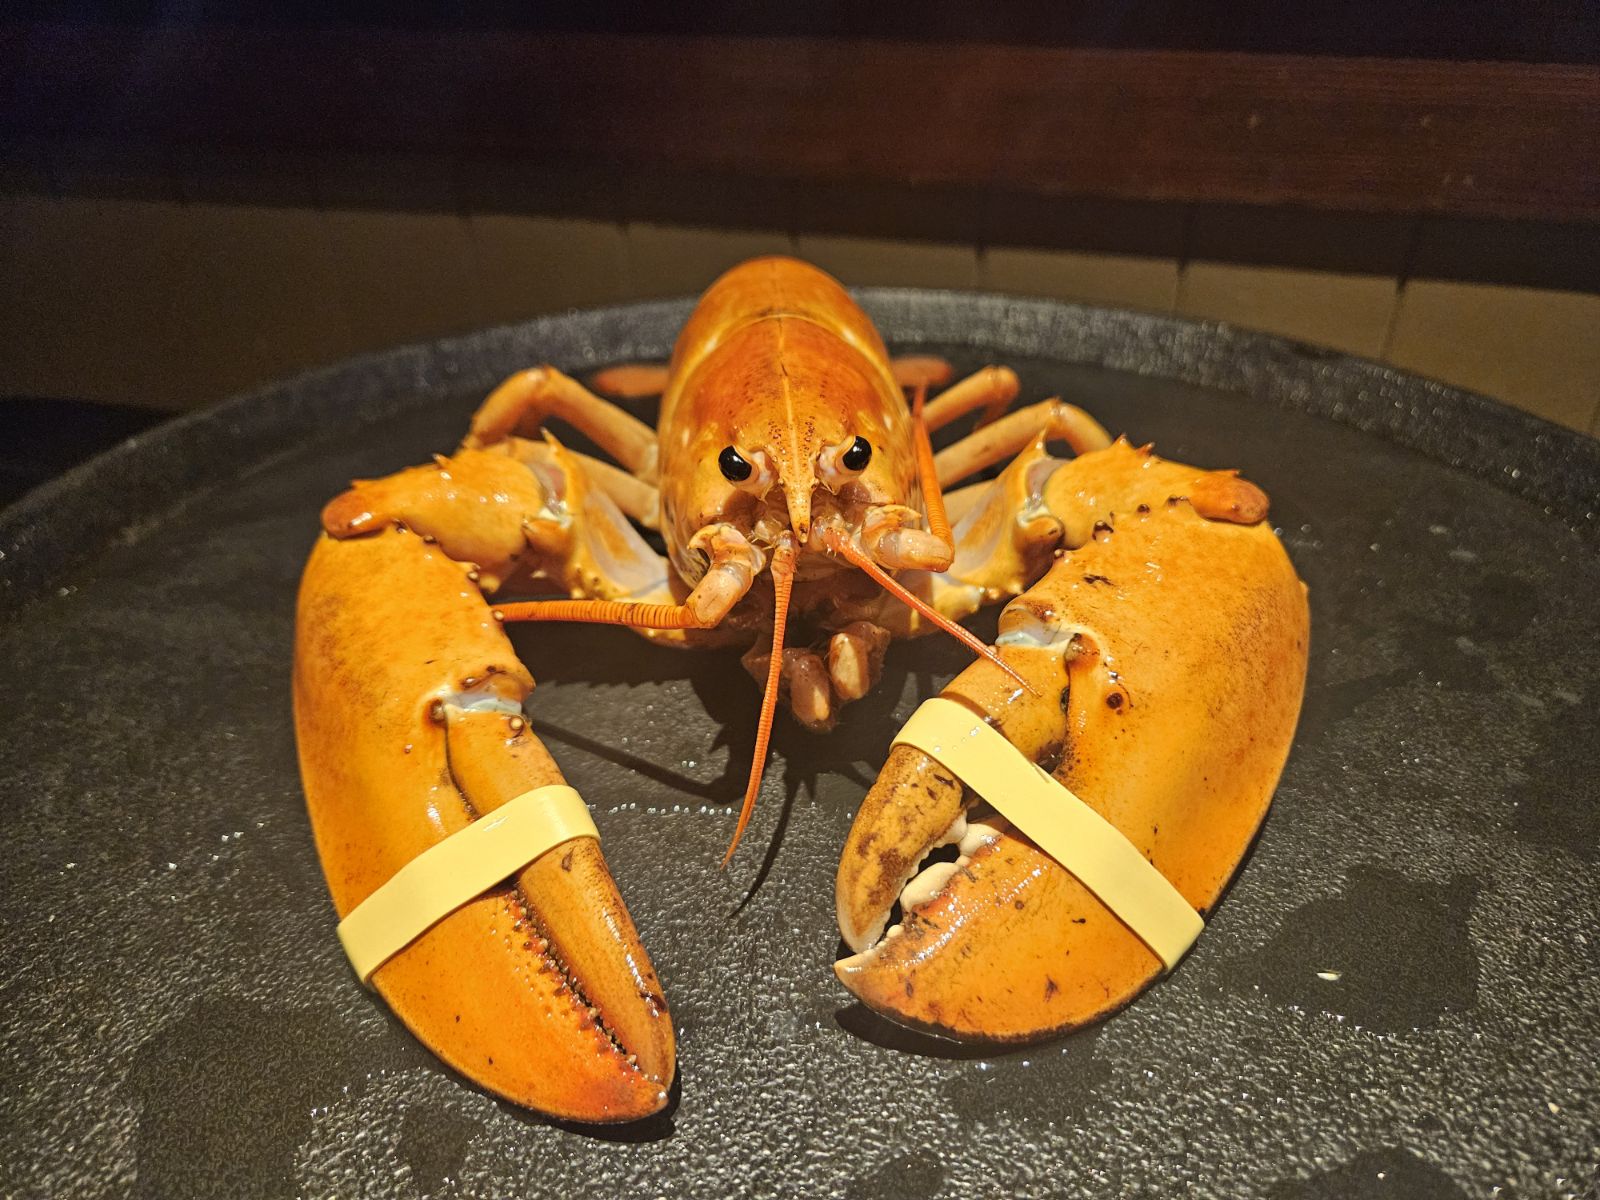 An orange lobster with rubber bands on its claws.